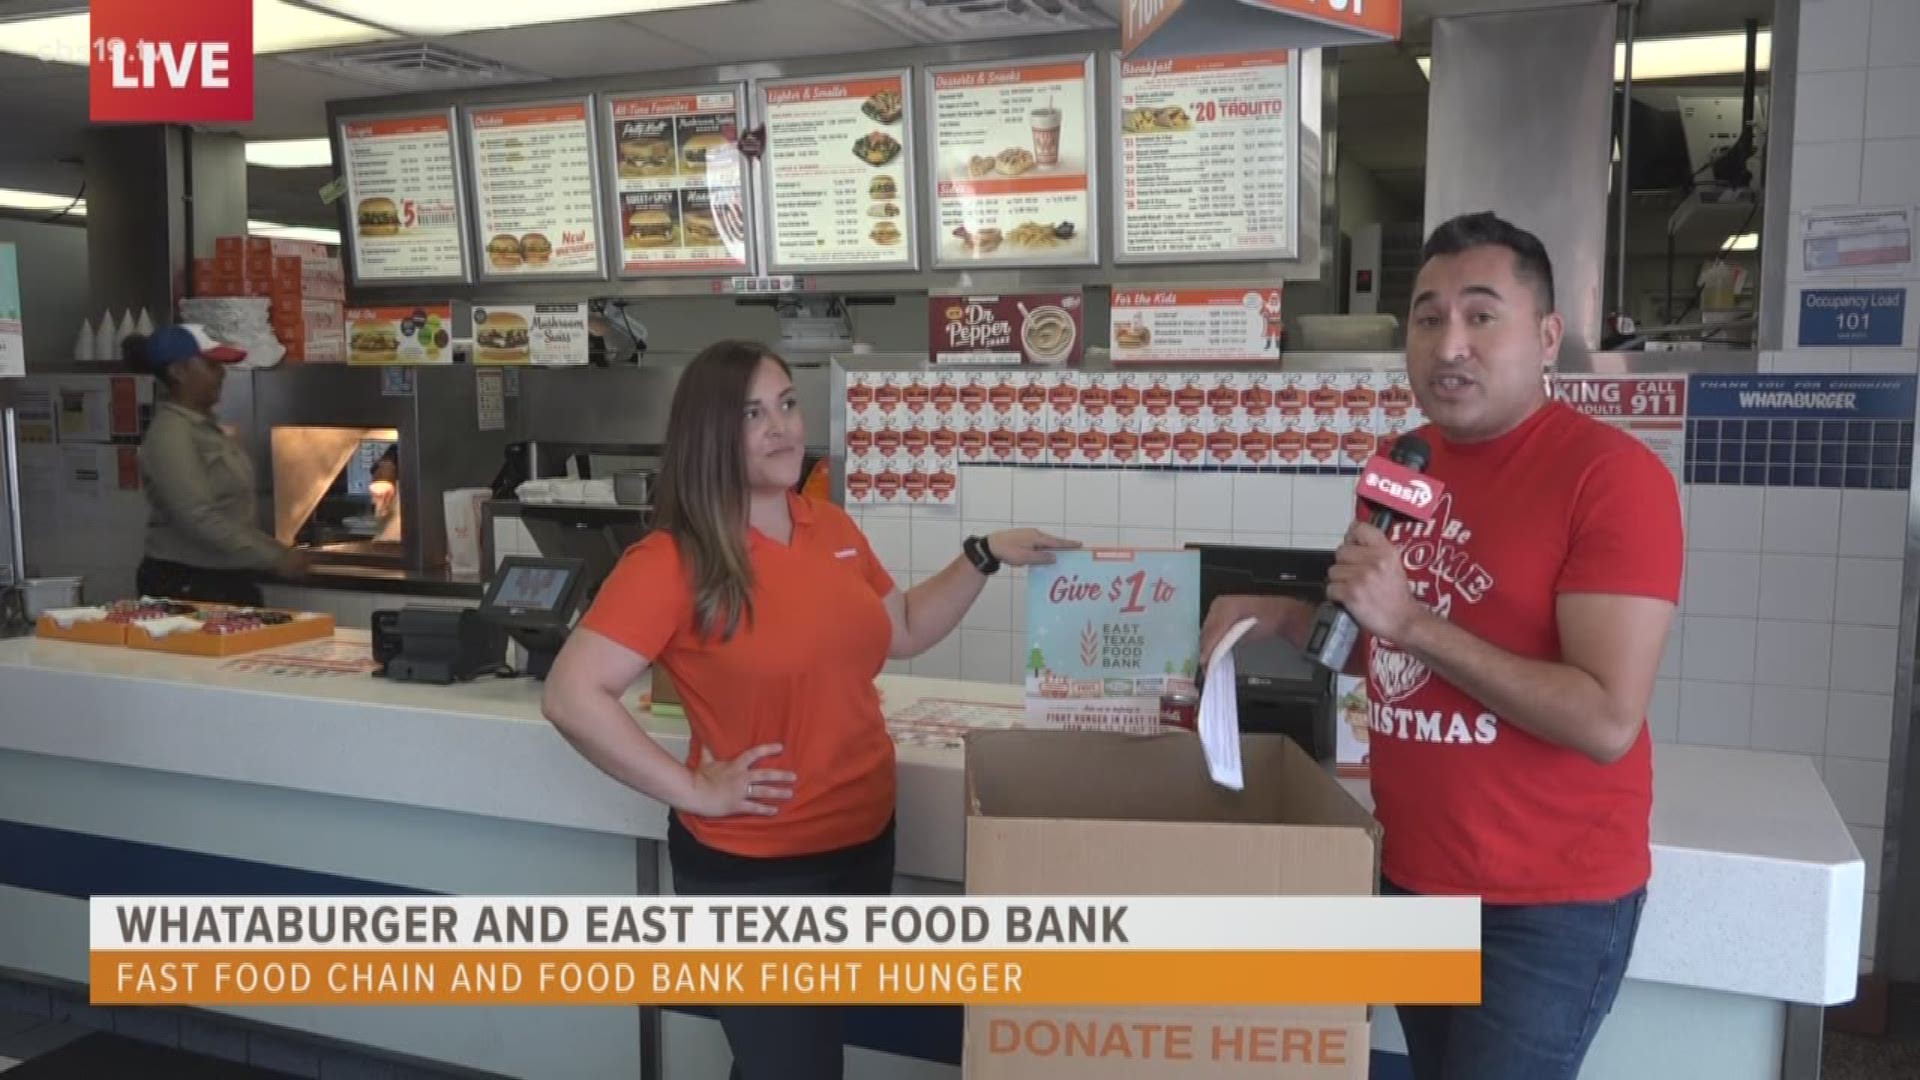 Whataburger and the East Texas Food Bank are teaming up for the 'Christmas in July' food drive. East Texans who donate two canned foods or non-perishable items from 3-7 p.m. Tuesday (at participating locations) will receive free Whataburger.